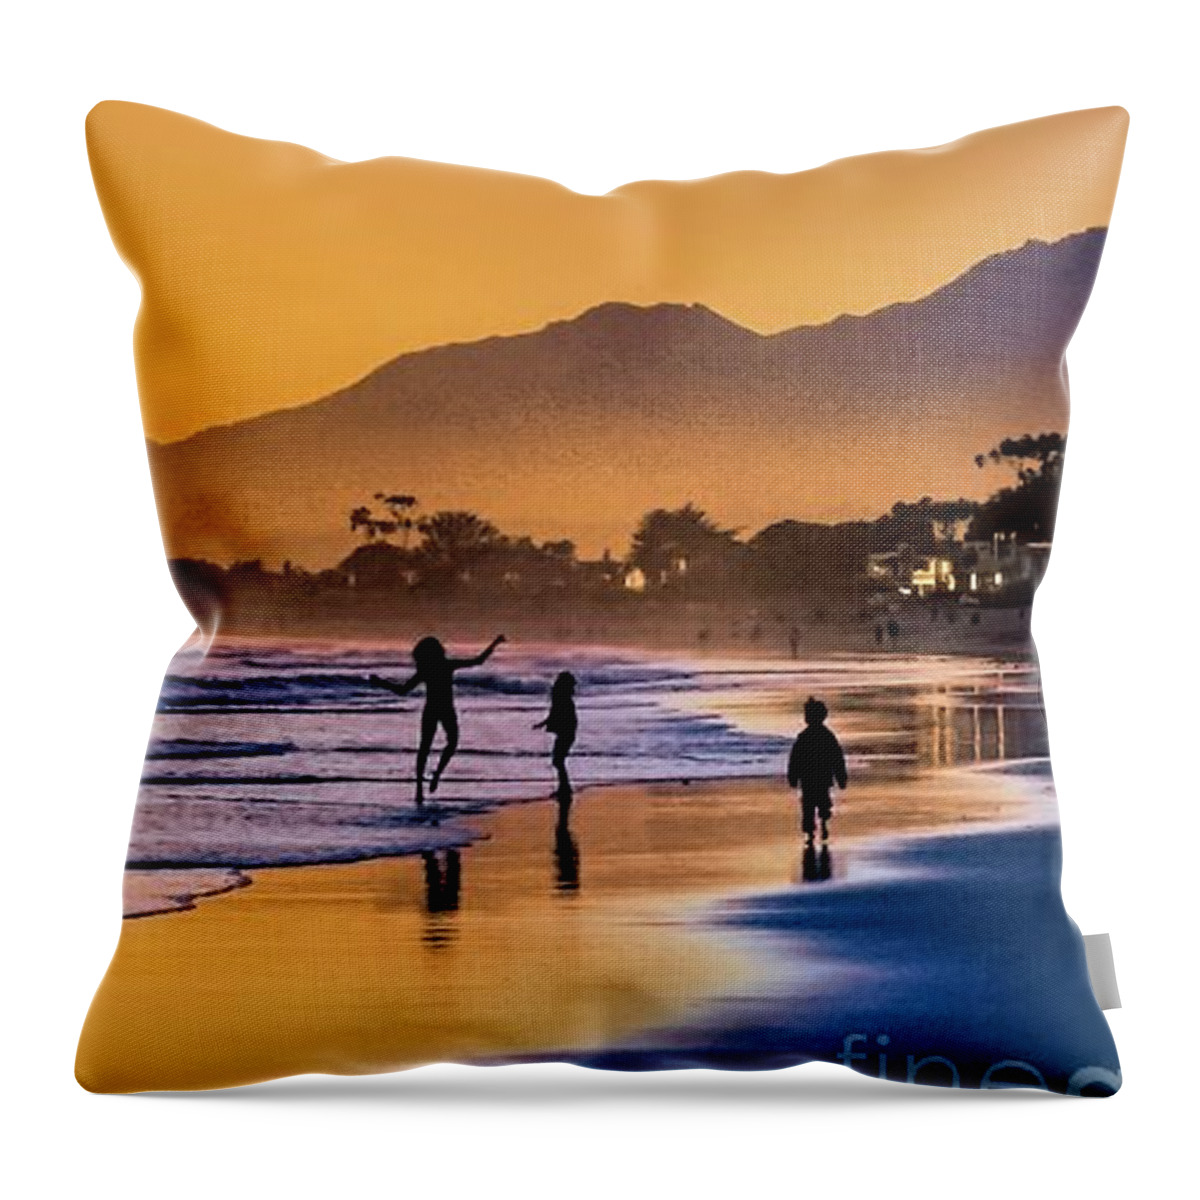 Sunset Throw Pillow featuring the photograph Happy Sunset Beach Dancer by Sea Change Vibes